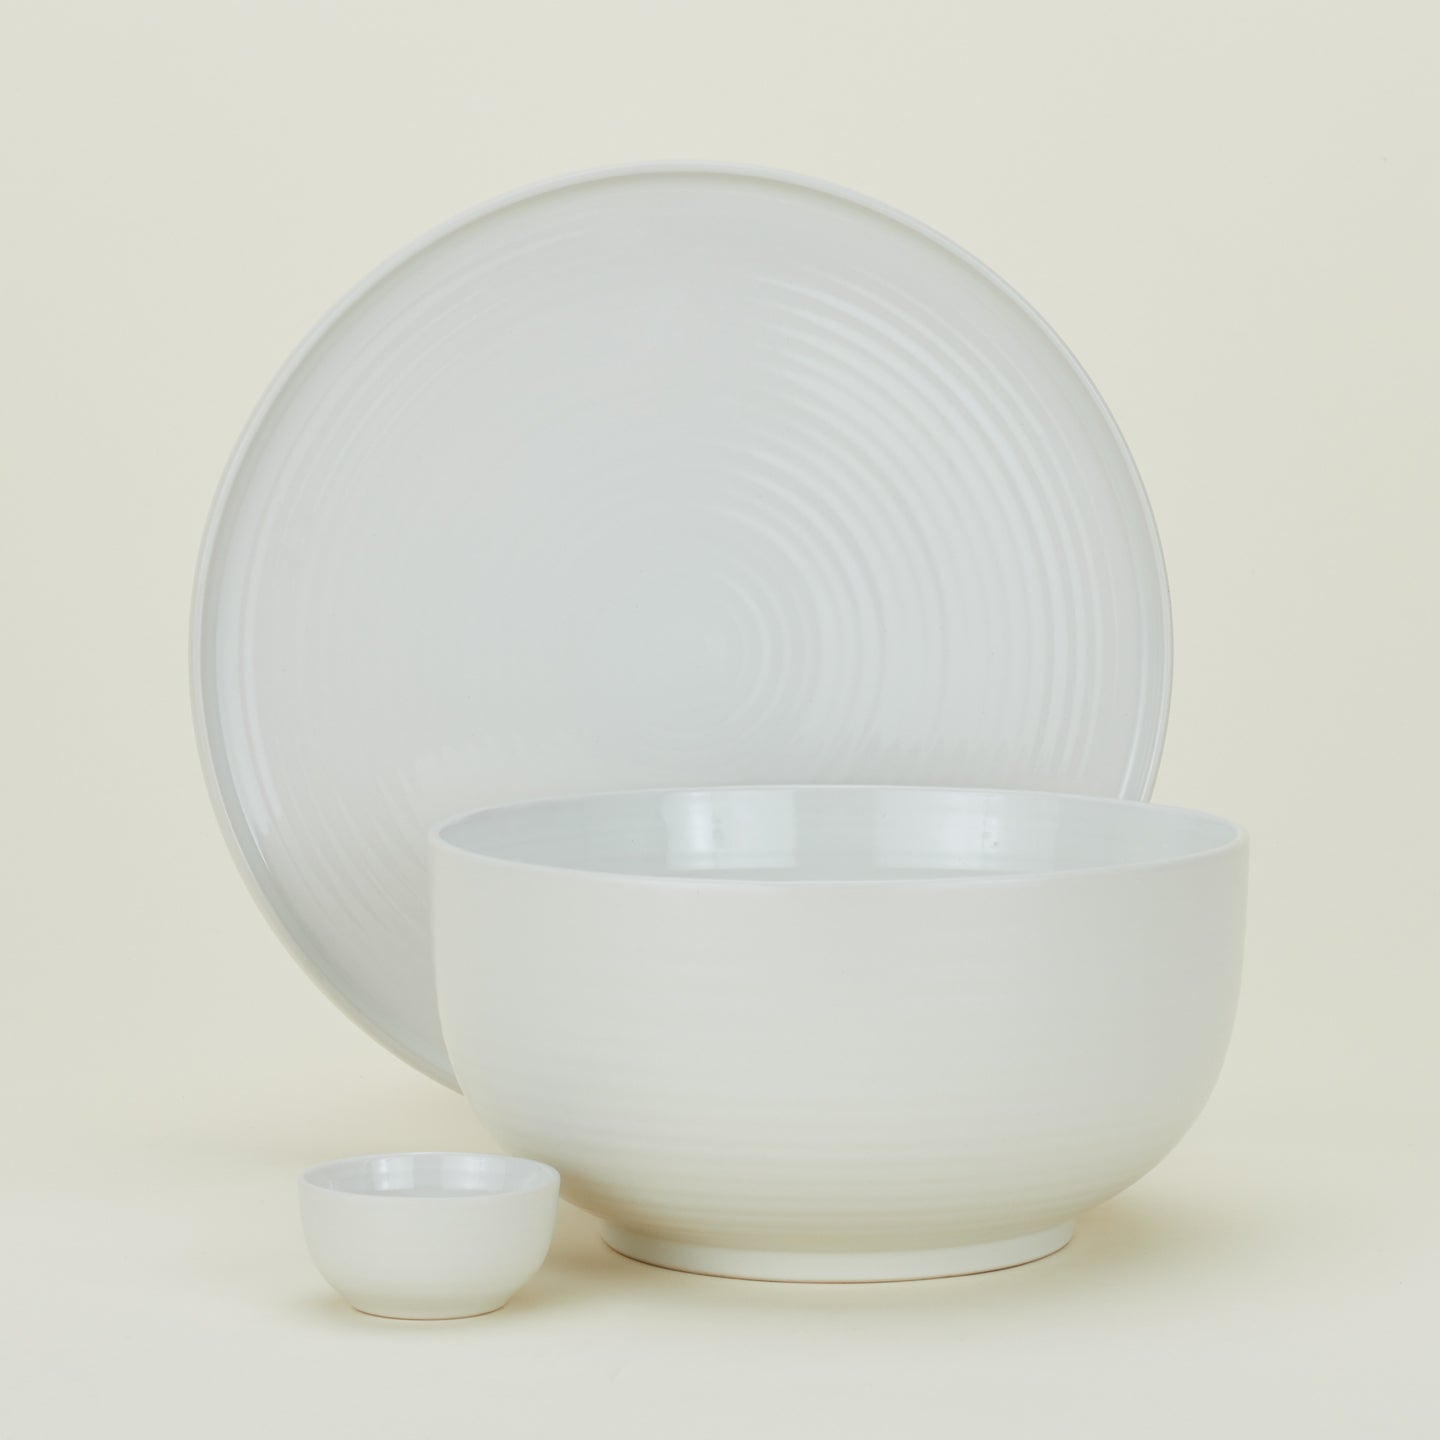 Group of Essential serving pieces in Bone including bowl, platter and extra small bowl.